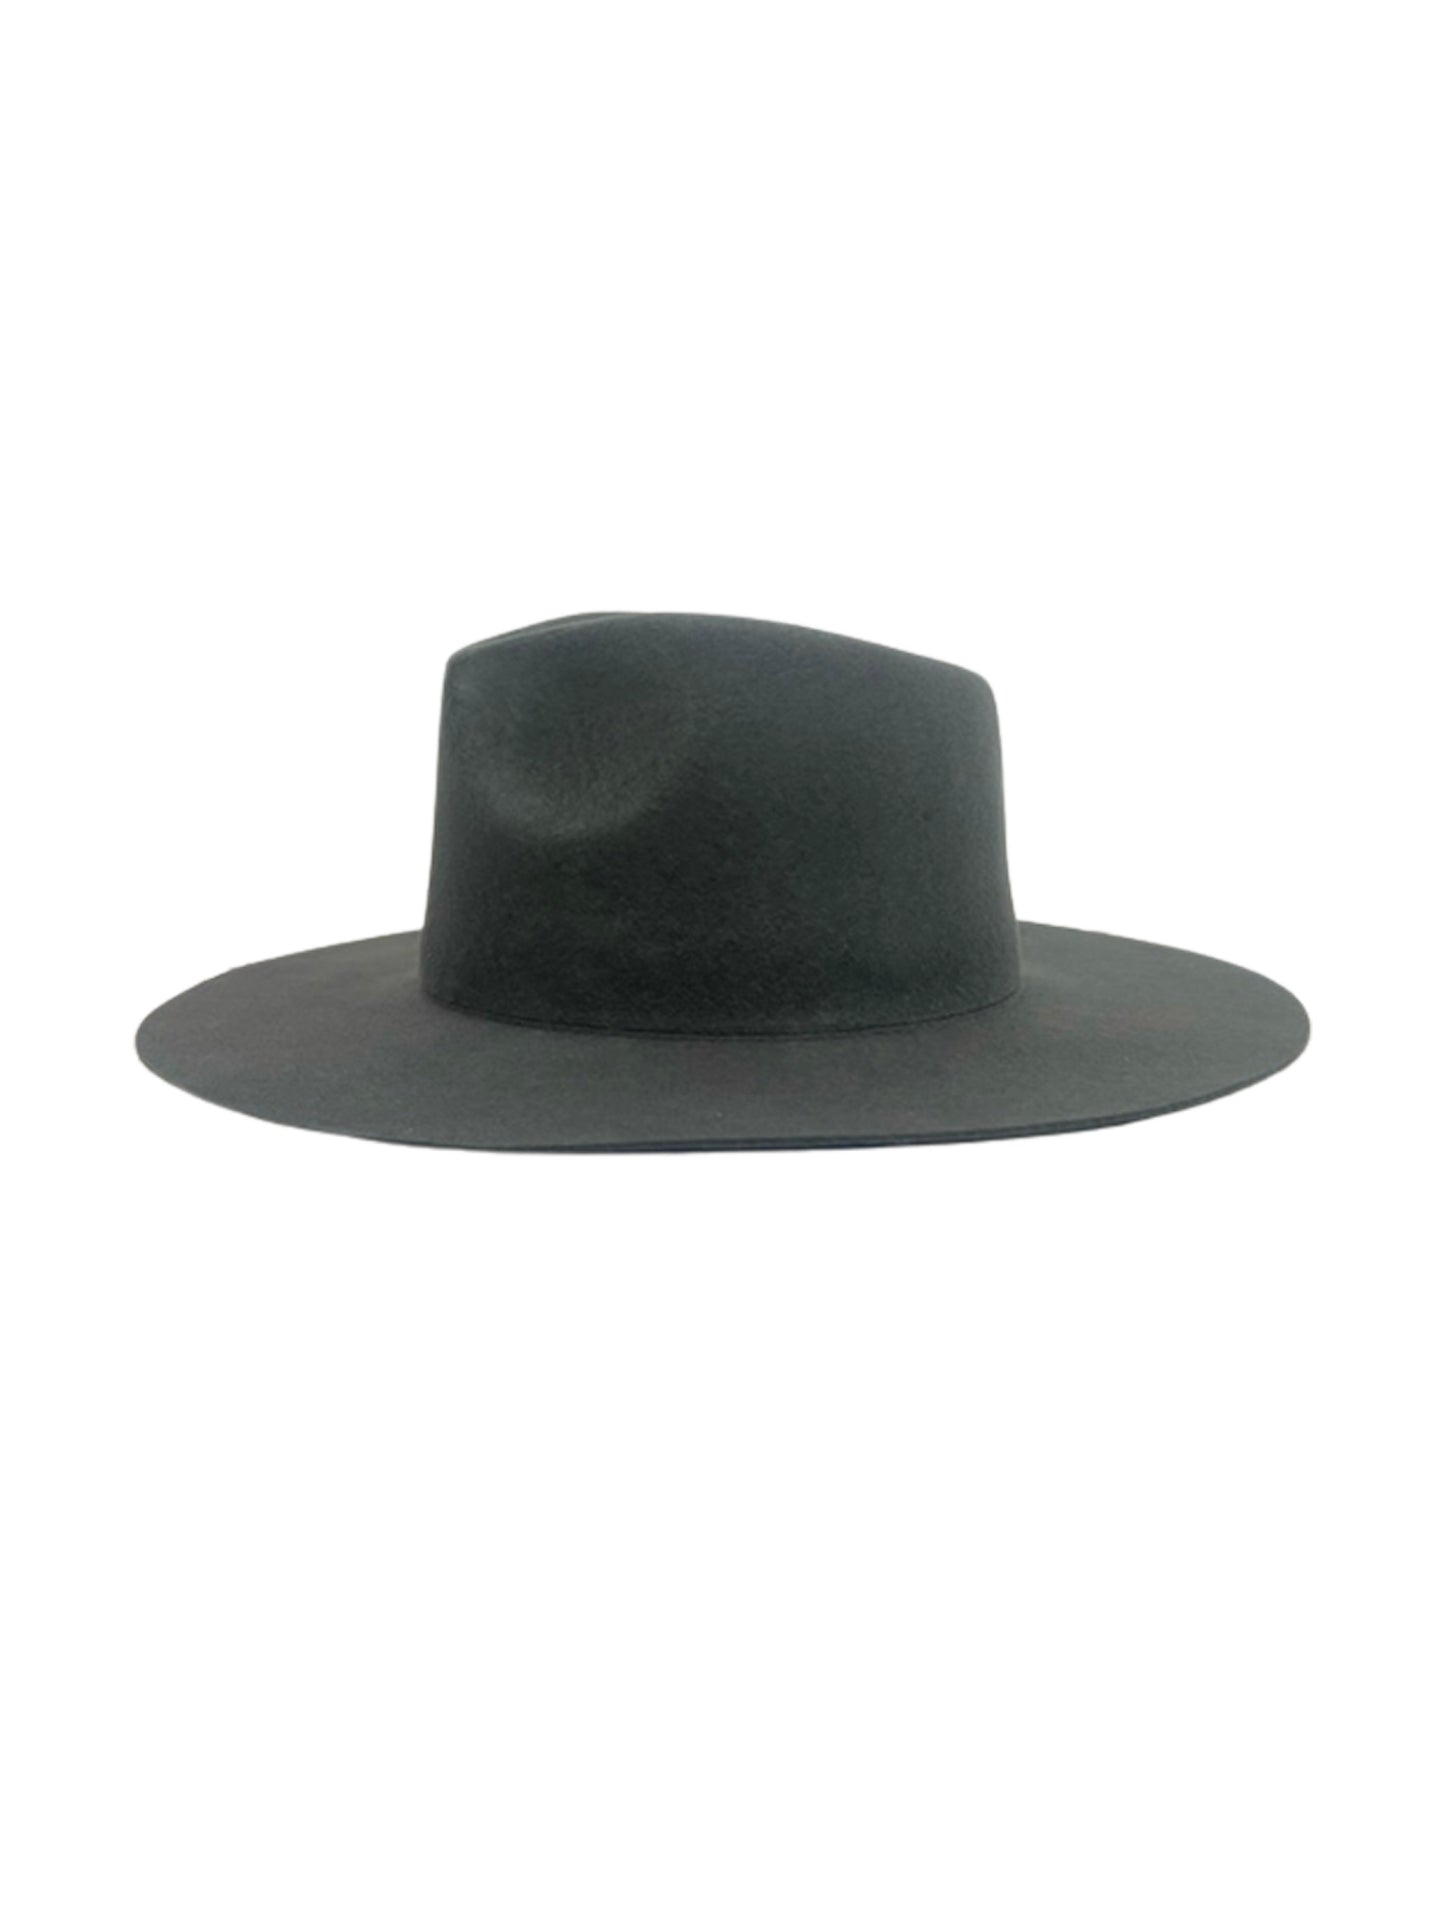 rancher hat charcoal side